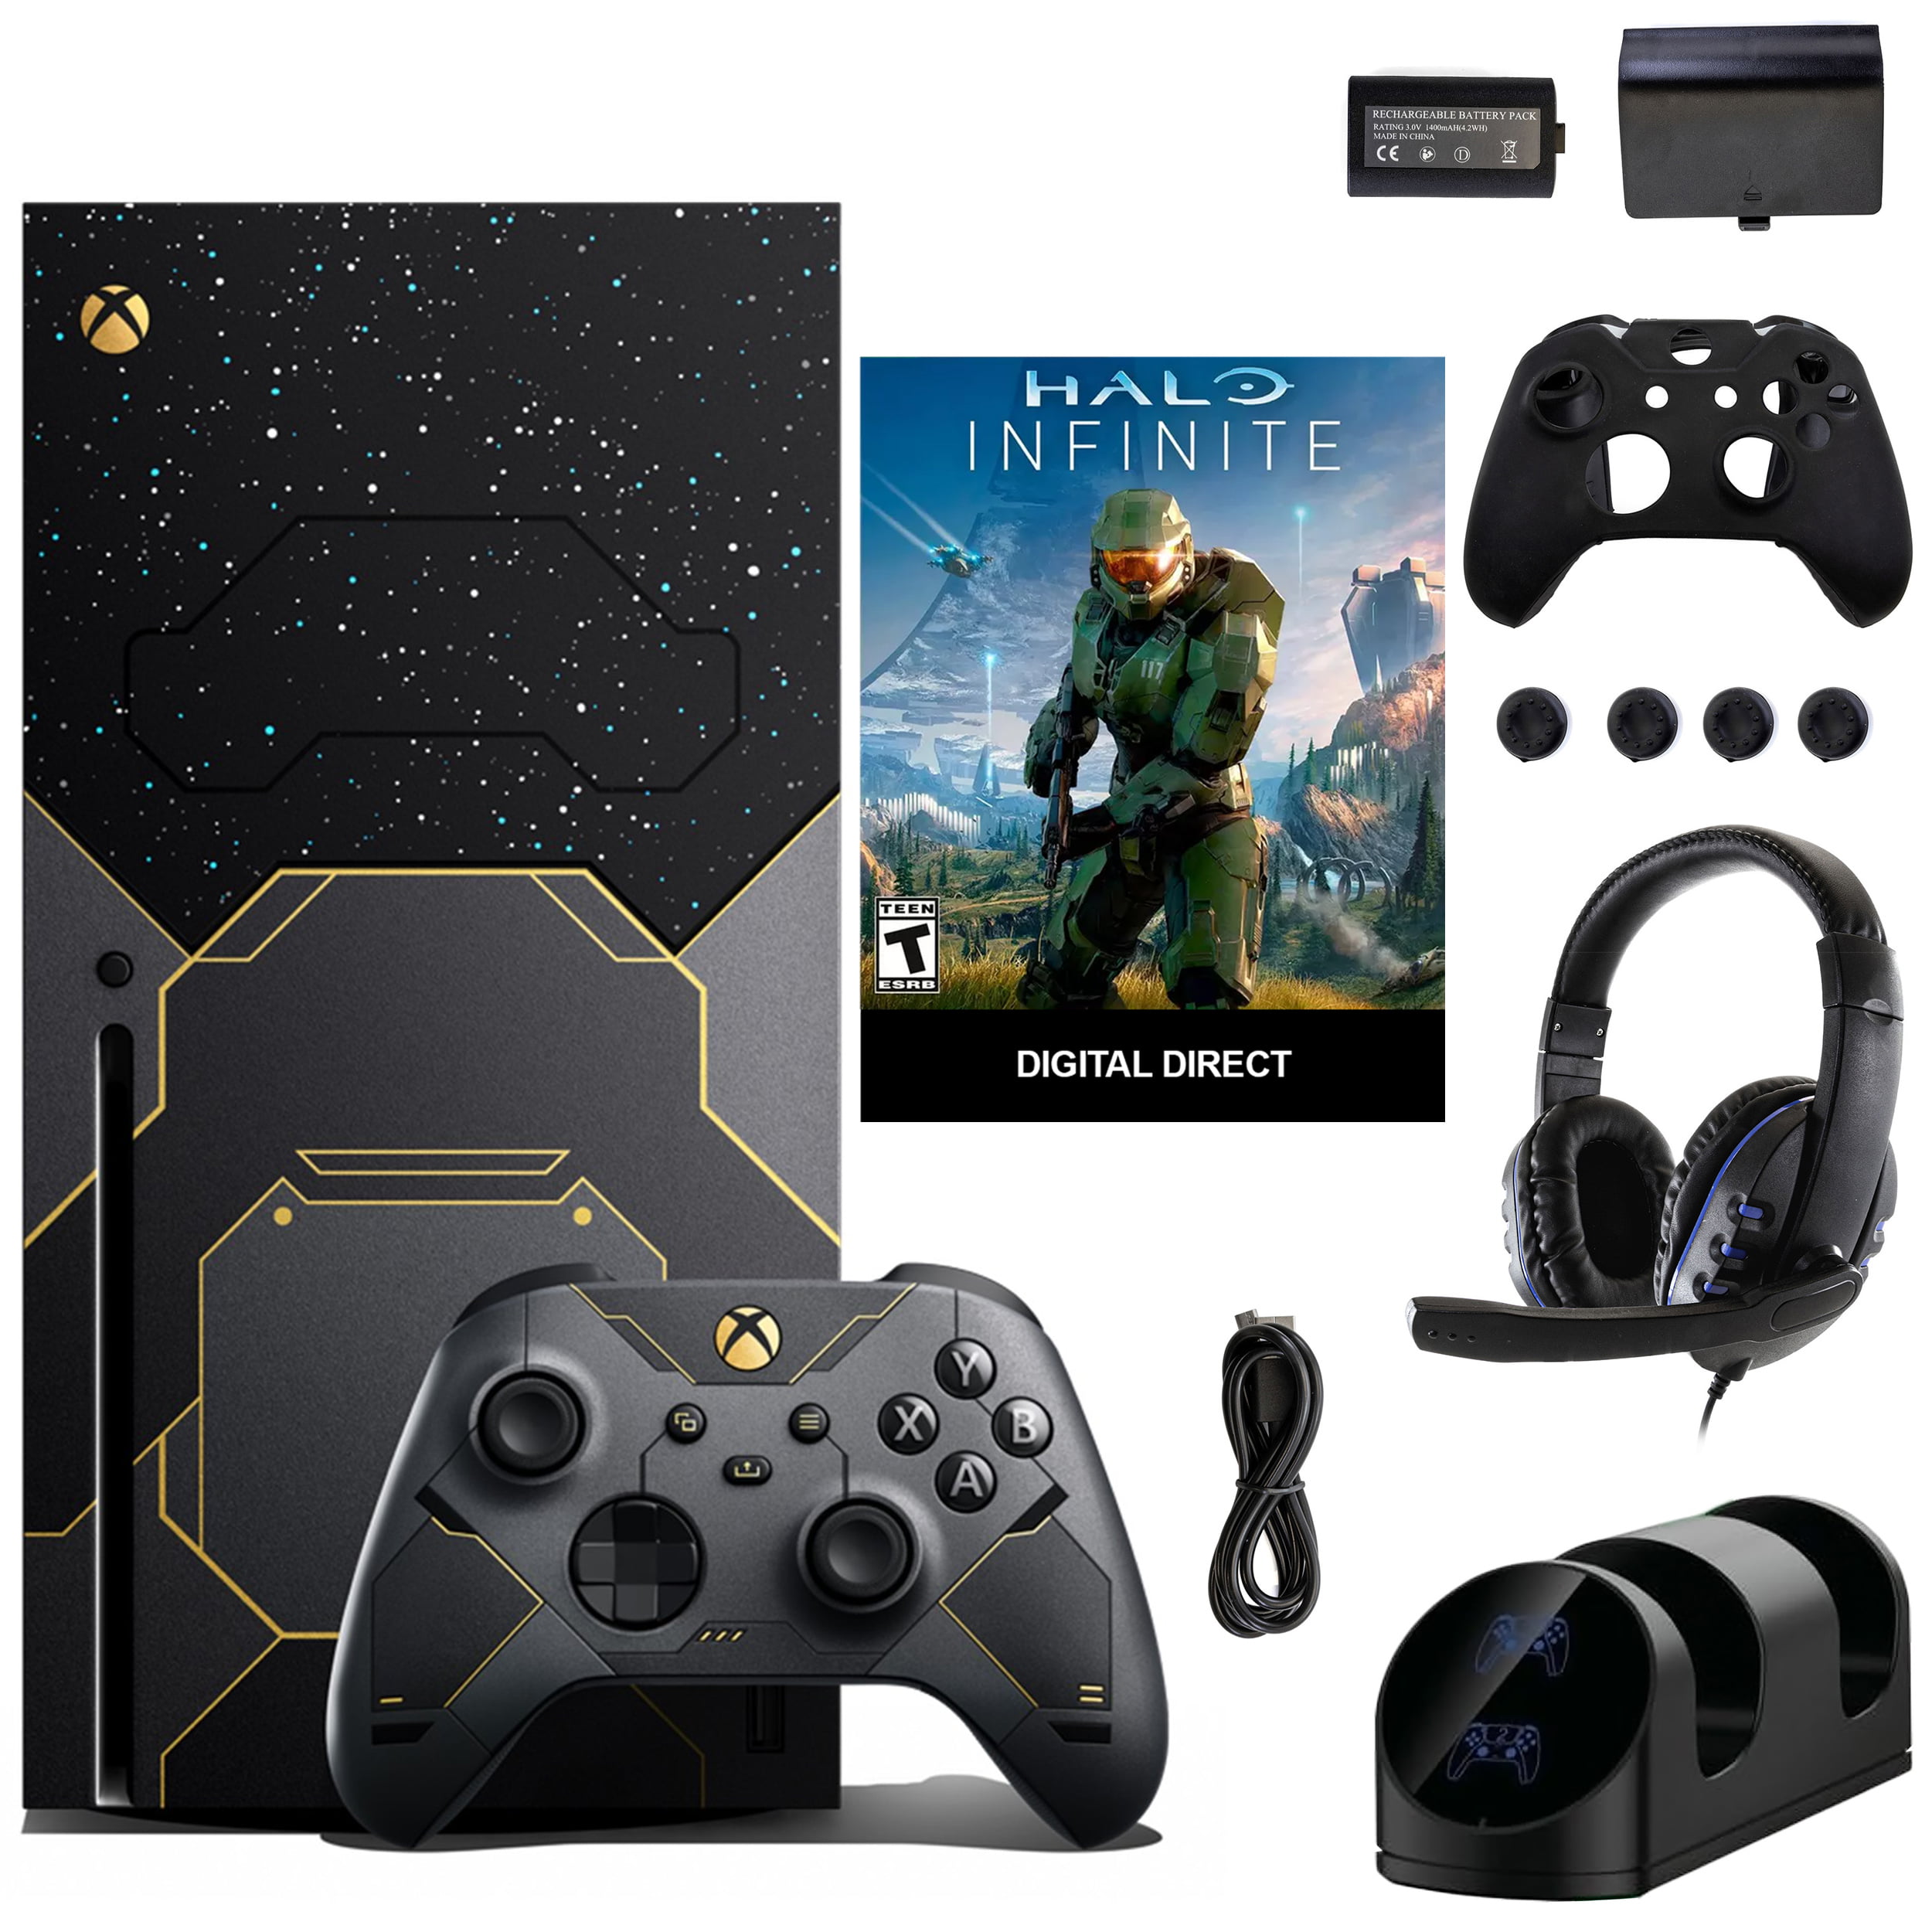 Microsoft Xbox Series X Limited Edition Halo Infinite Console with 